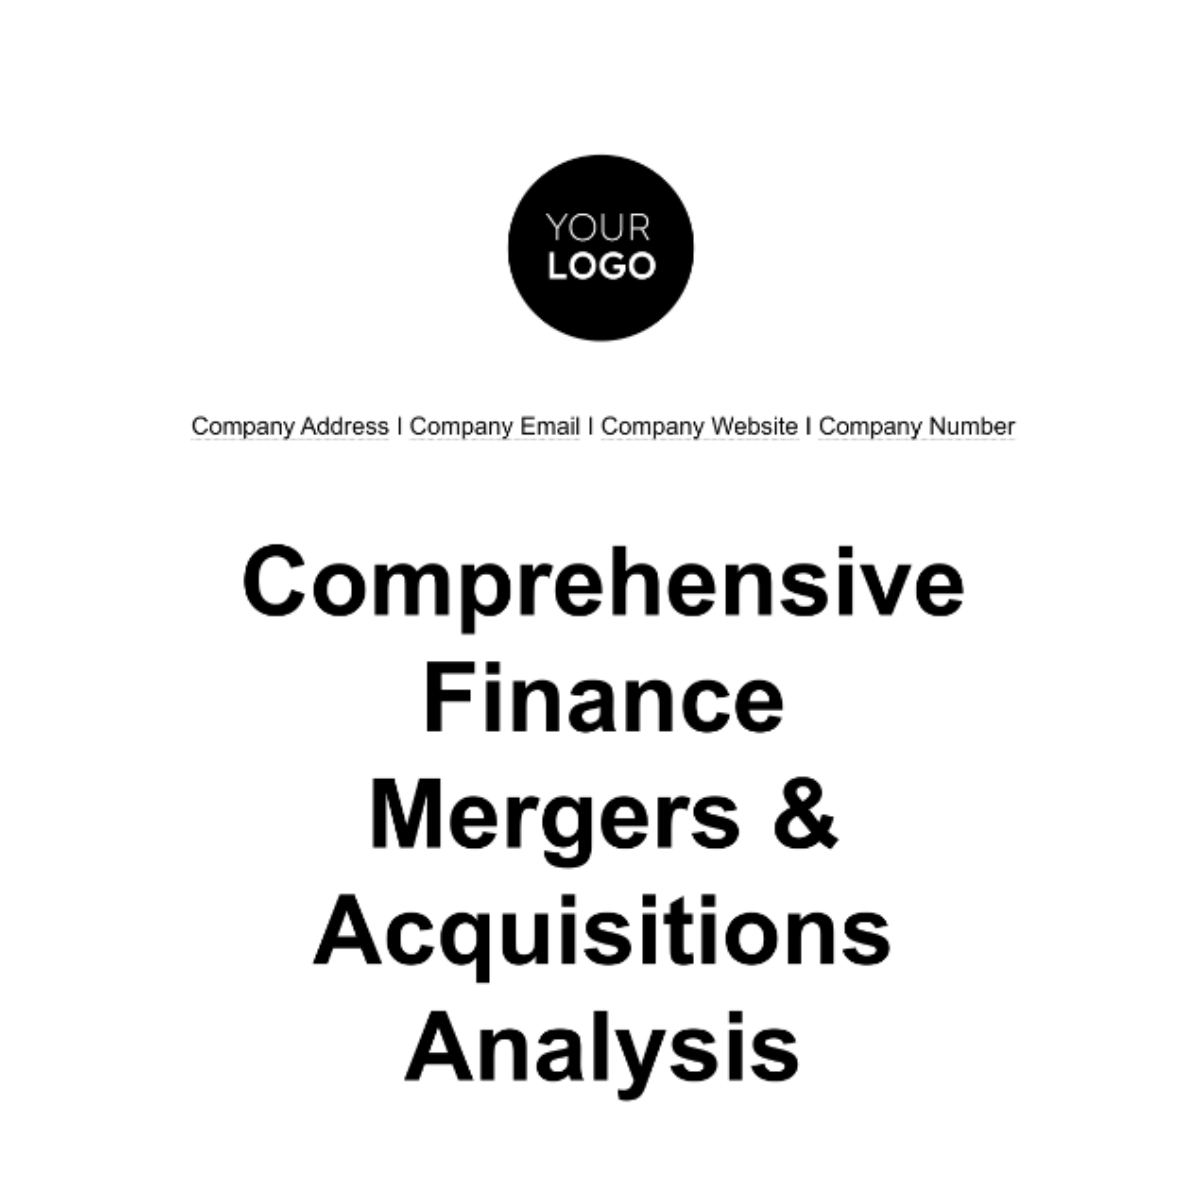 Free Comprehensive Finance Mergers & Acquisitions Analysis Template